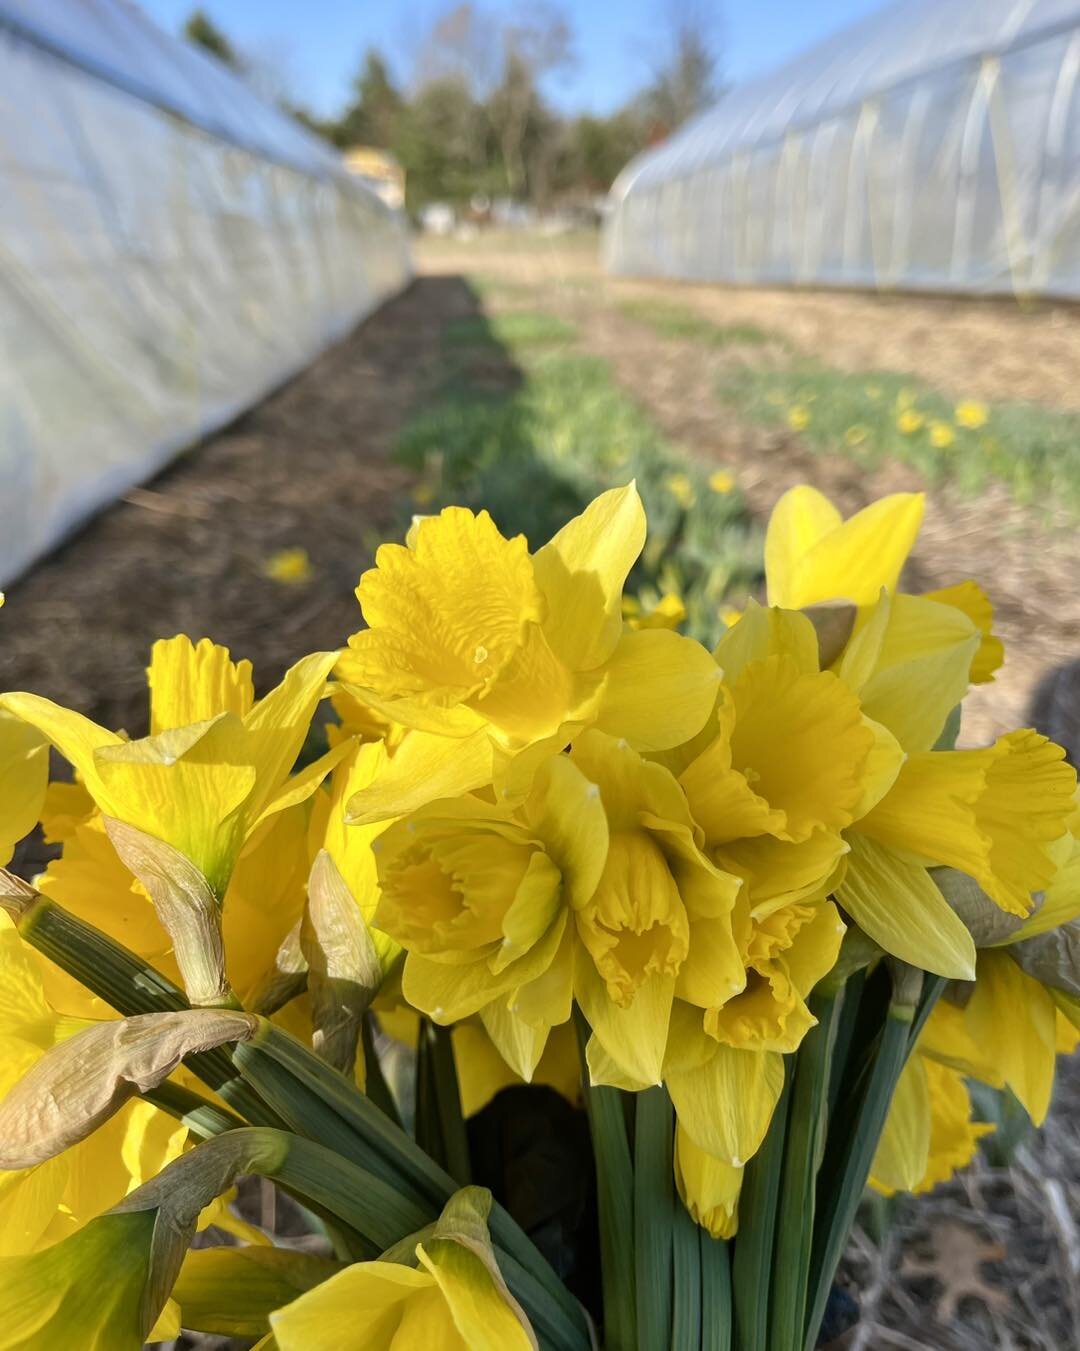 Look what came popping up a few days ago! We&rsquo;ll have a few daffodils, plus fresh kale, herbs and lettuce (plus all your favorite storage veggies) at Meridian Township Farmers' Market tomorrow inside the Meridian Mall! 
See you there!
 #winterfa